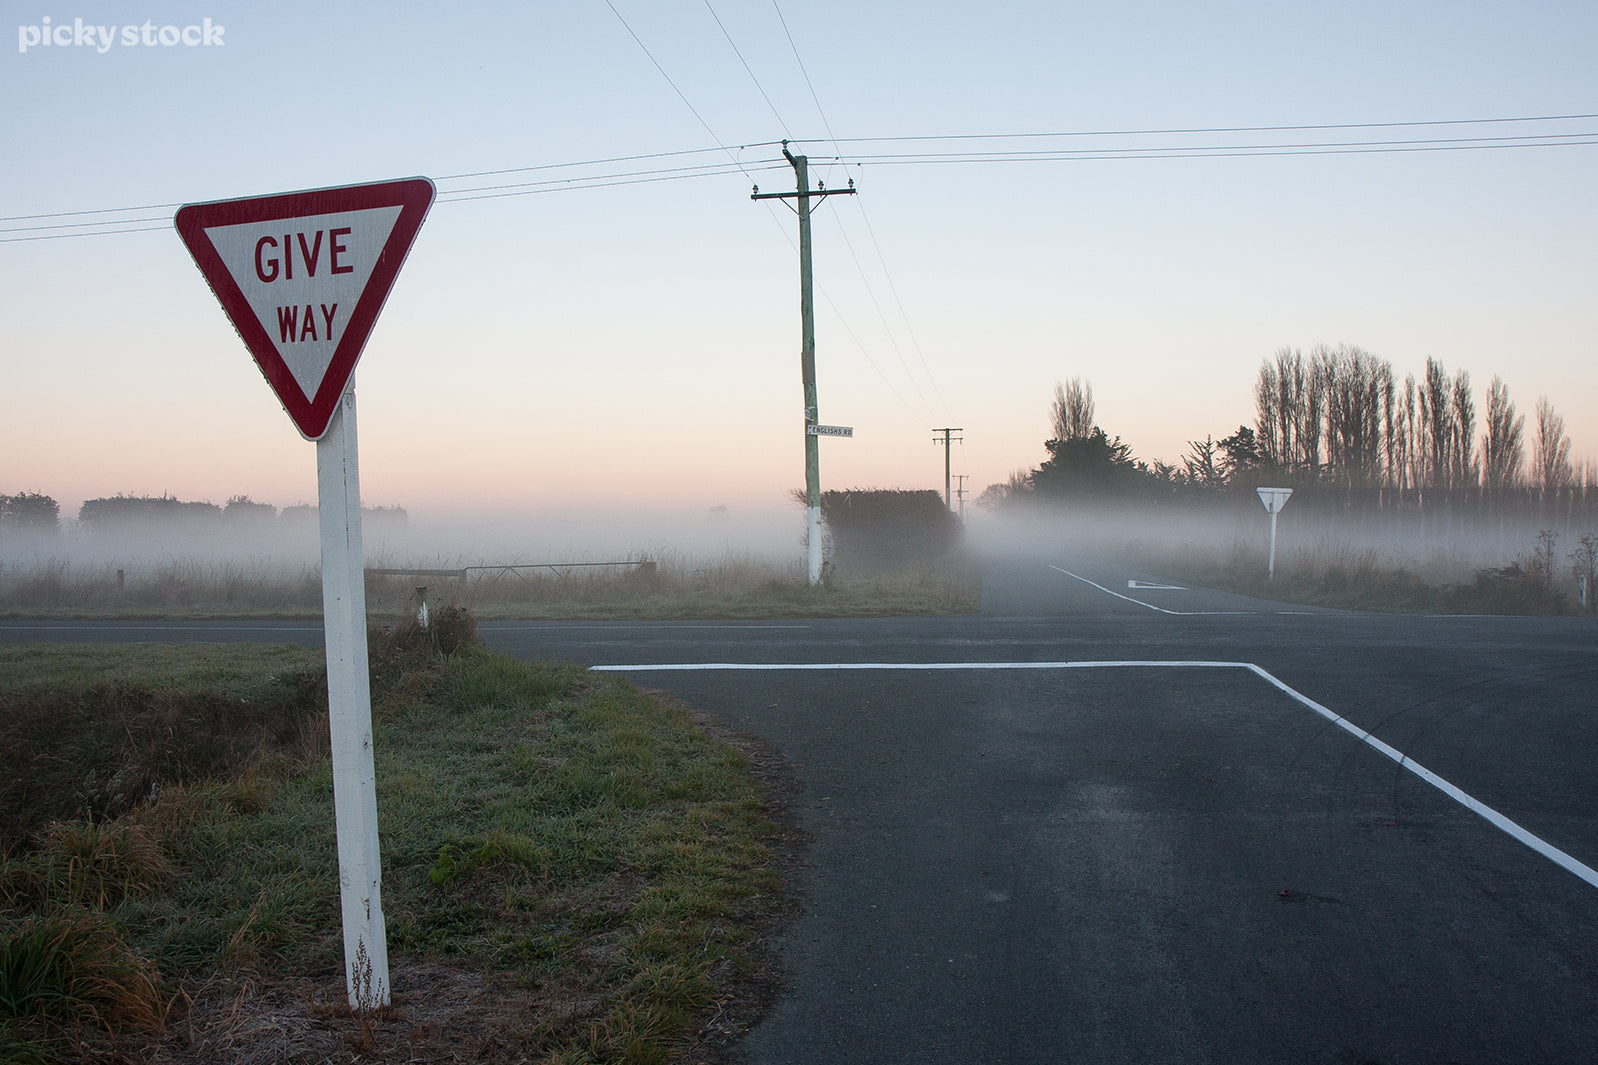 Landscape of a rural intersection doused in heavy fog, a white ‘give way’ sign leans in the foreground while a powerline crisscrosses the road. Dead trees, stretch tall and lean from the fog like grey fingers.